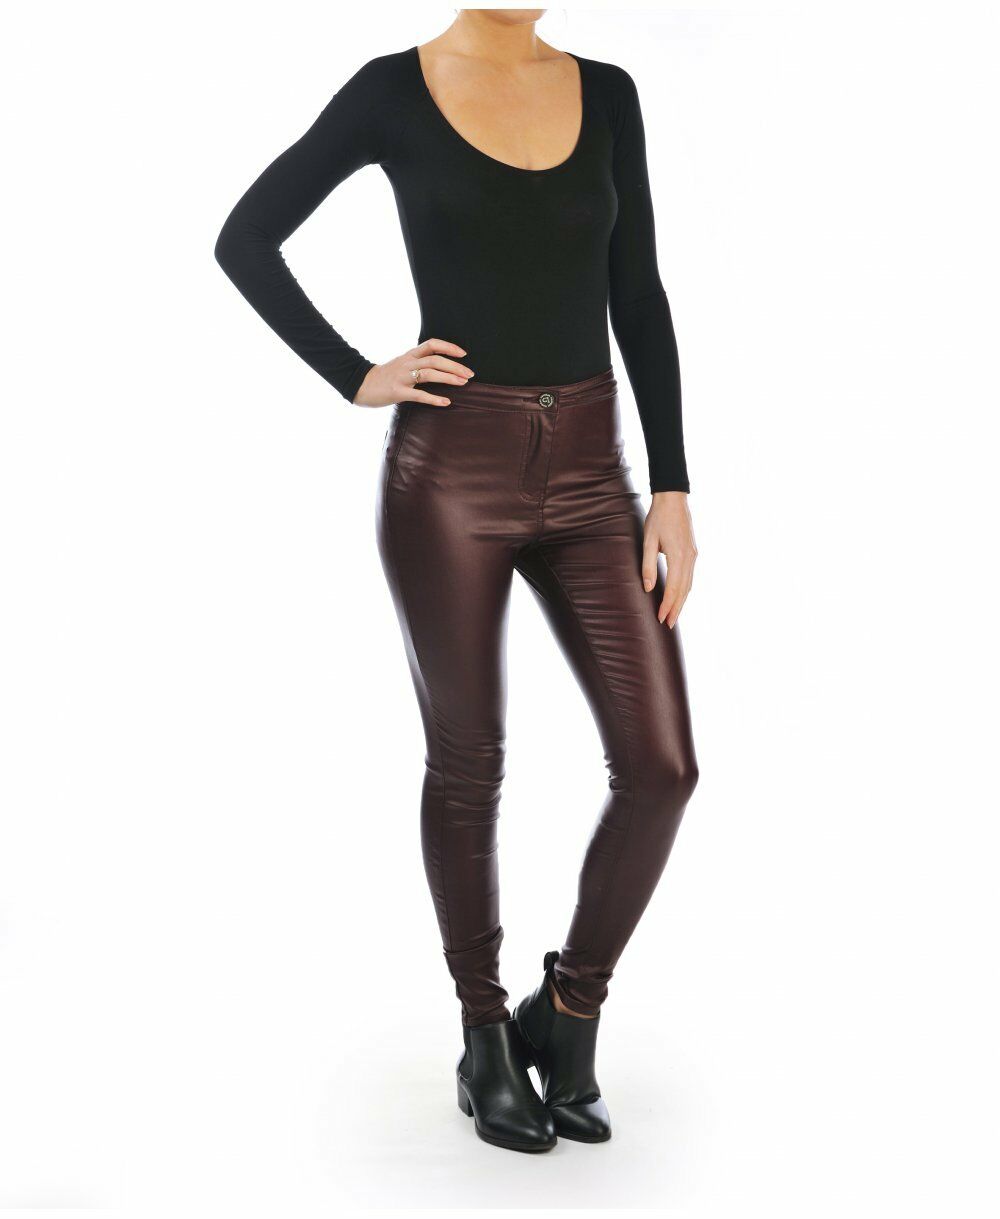 Plum High Waisted Leather Look Skinny Jeans - Front Pose